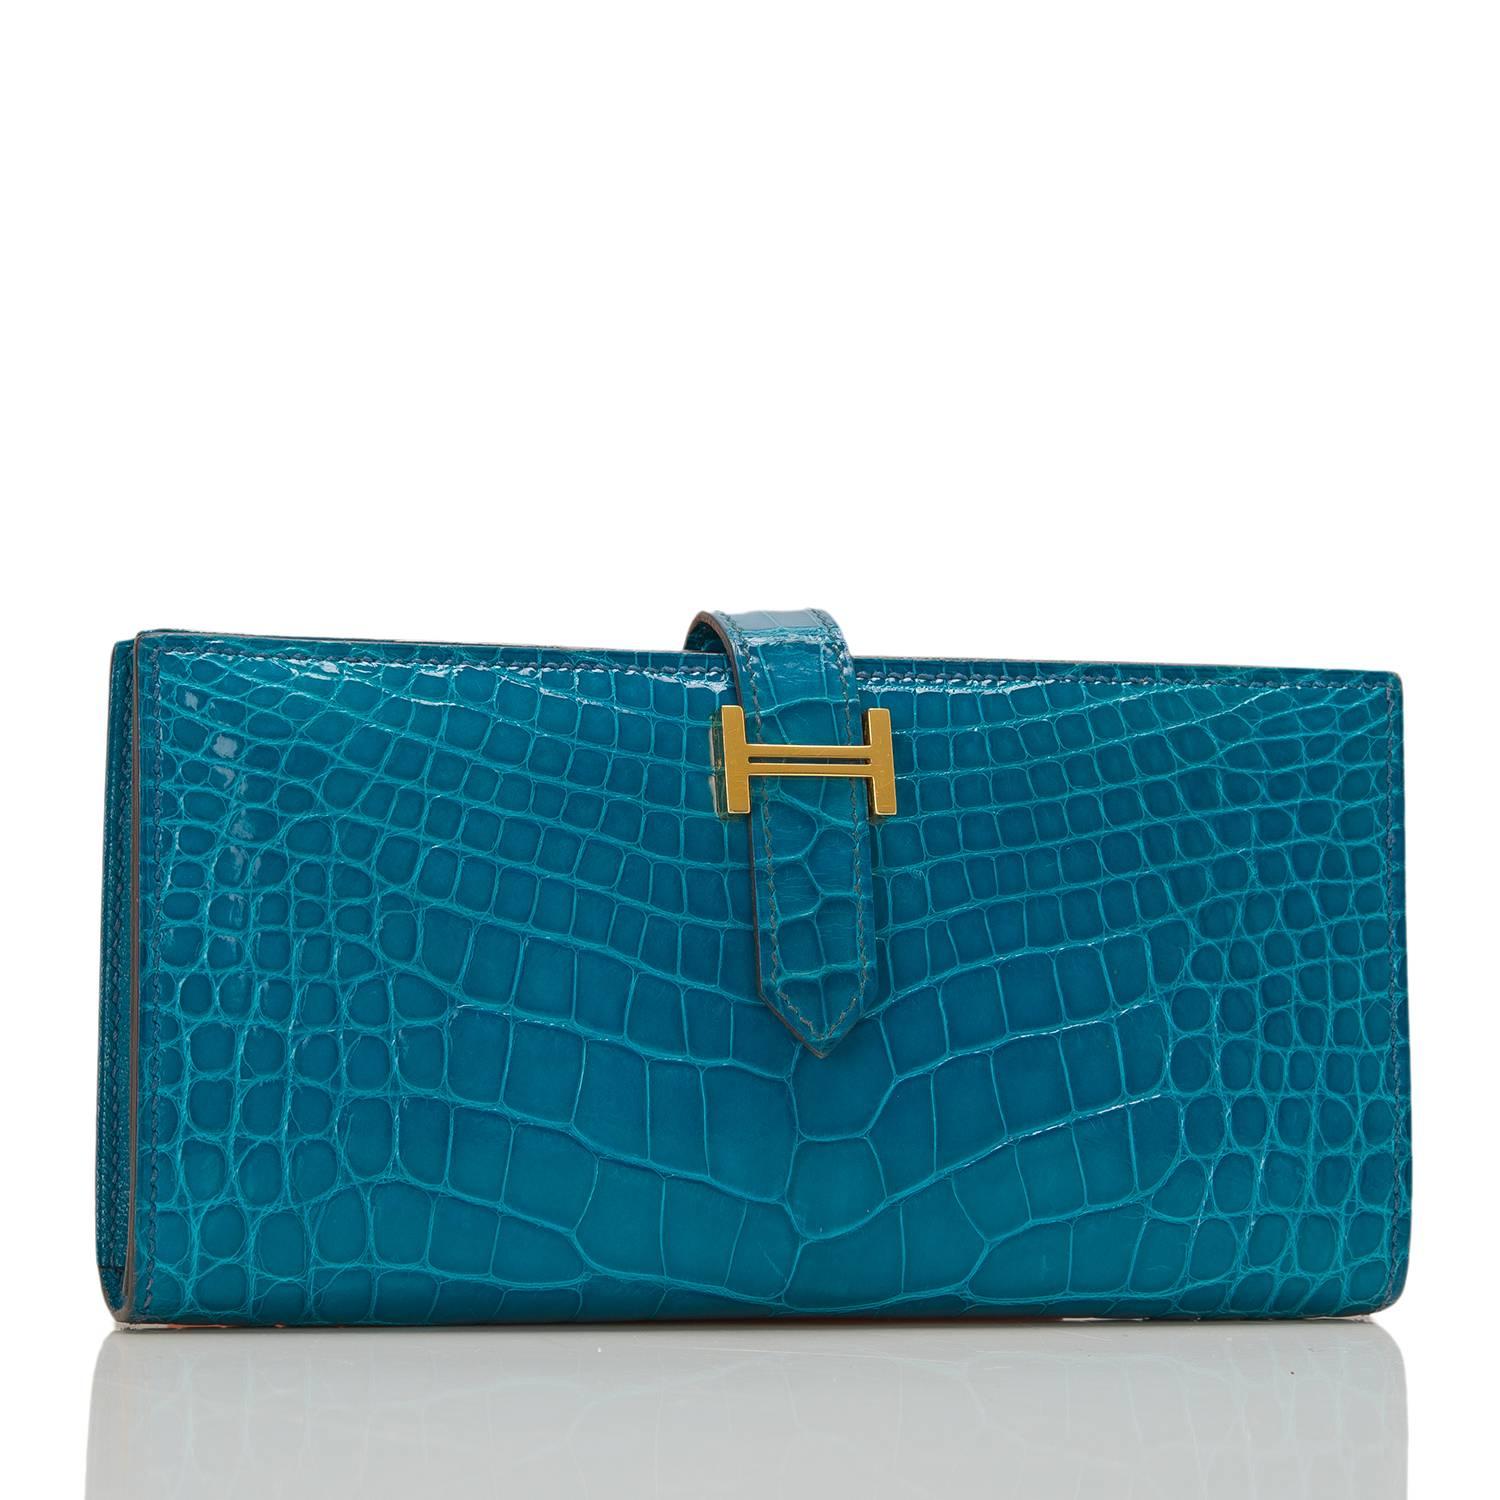 Hermes Blue Izmir Bearn wallet of Alligator with gold hardware.

This style features a front 